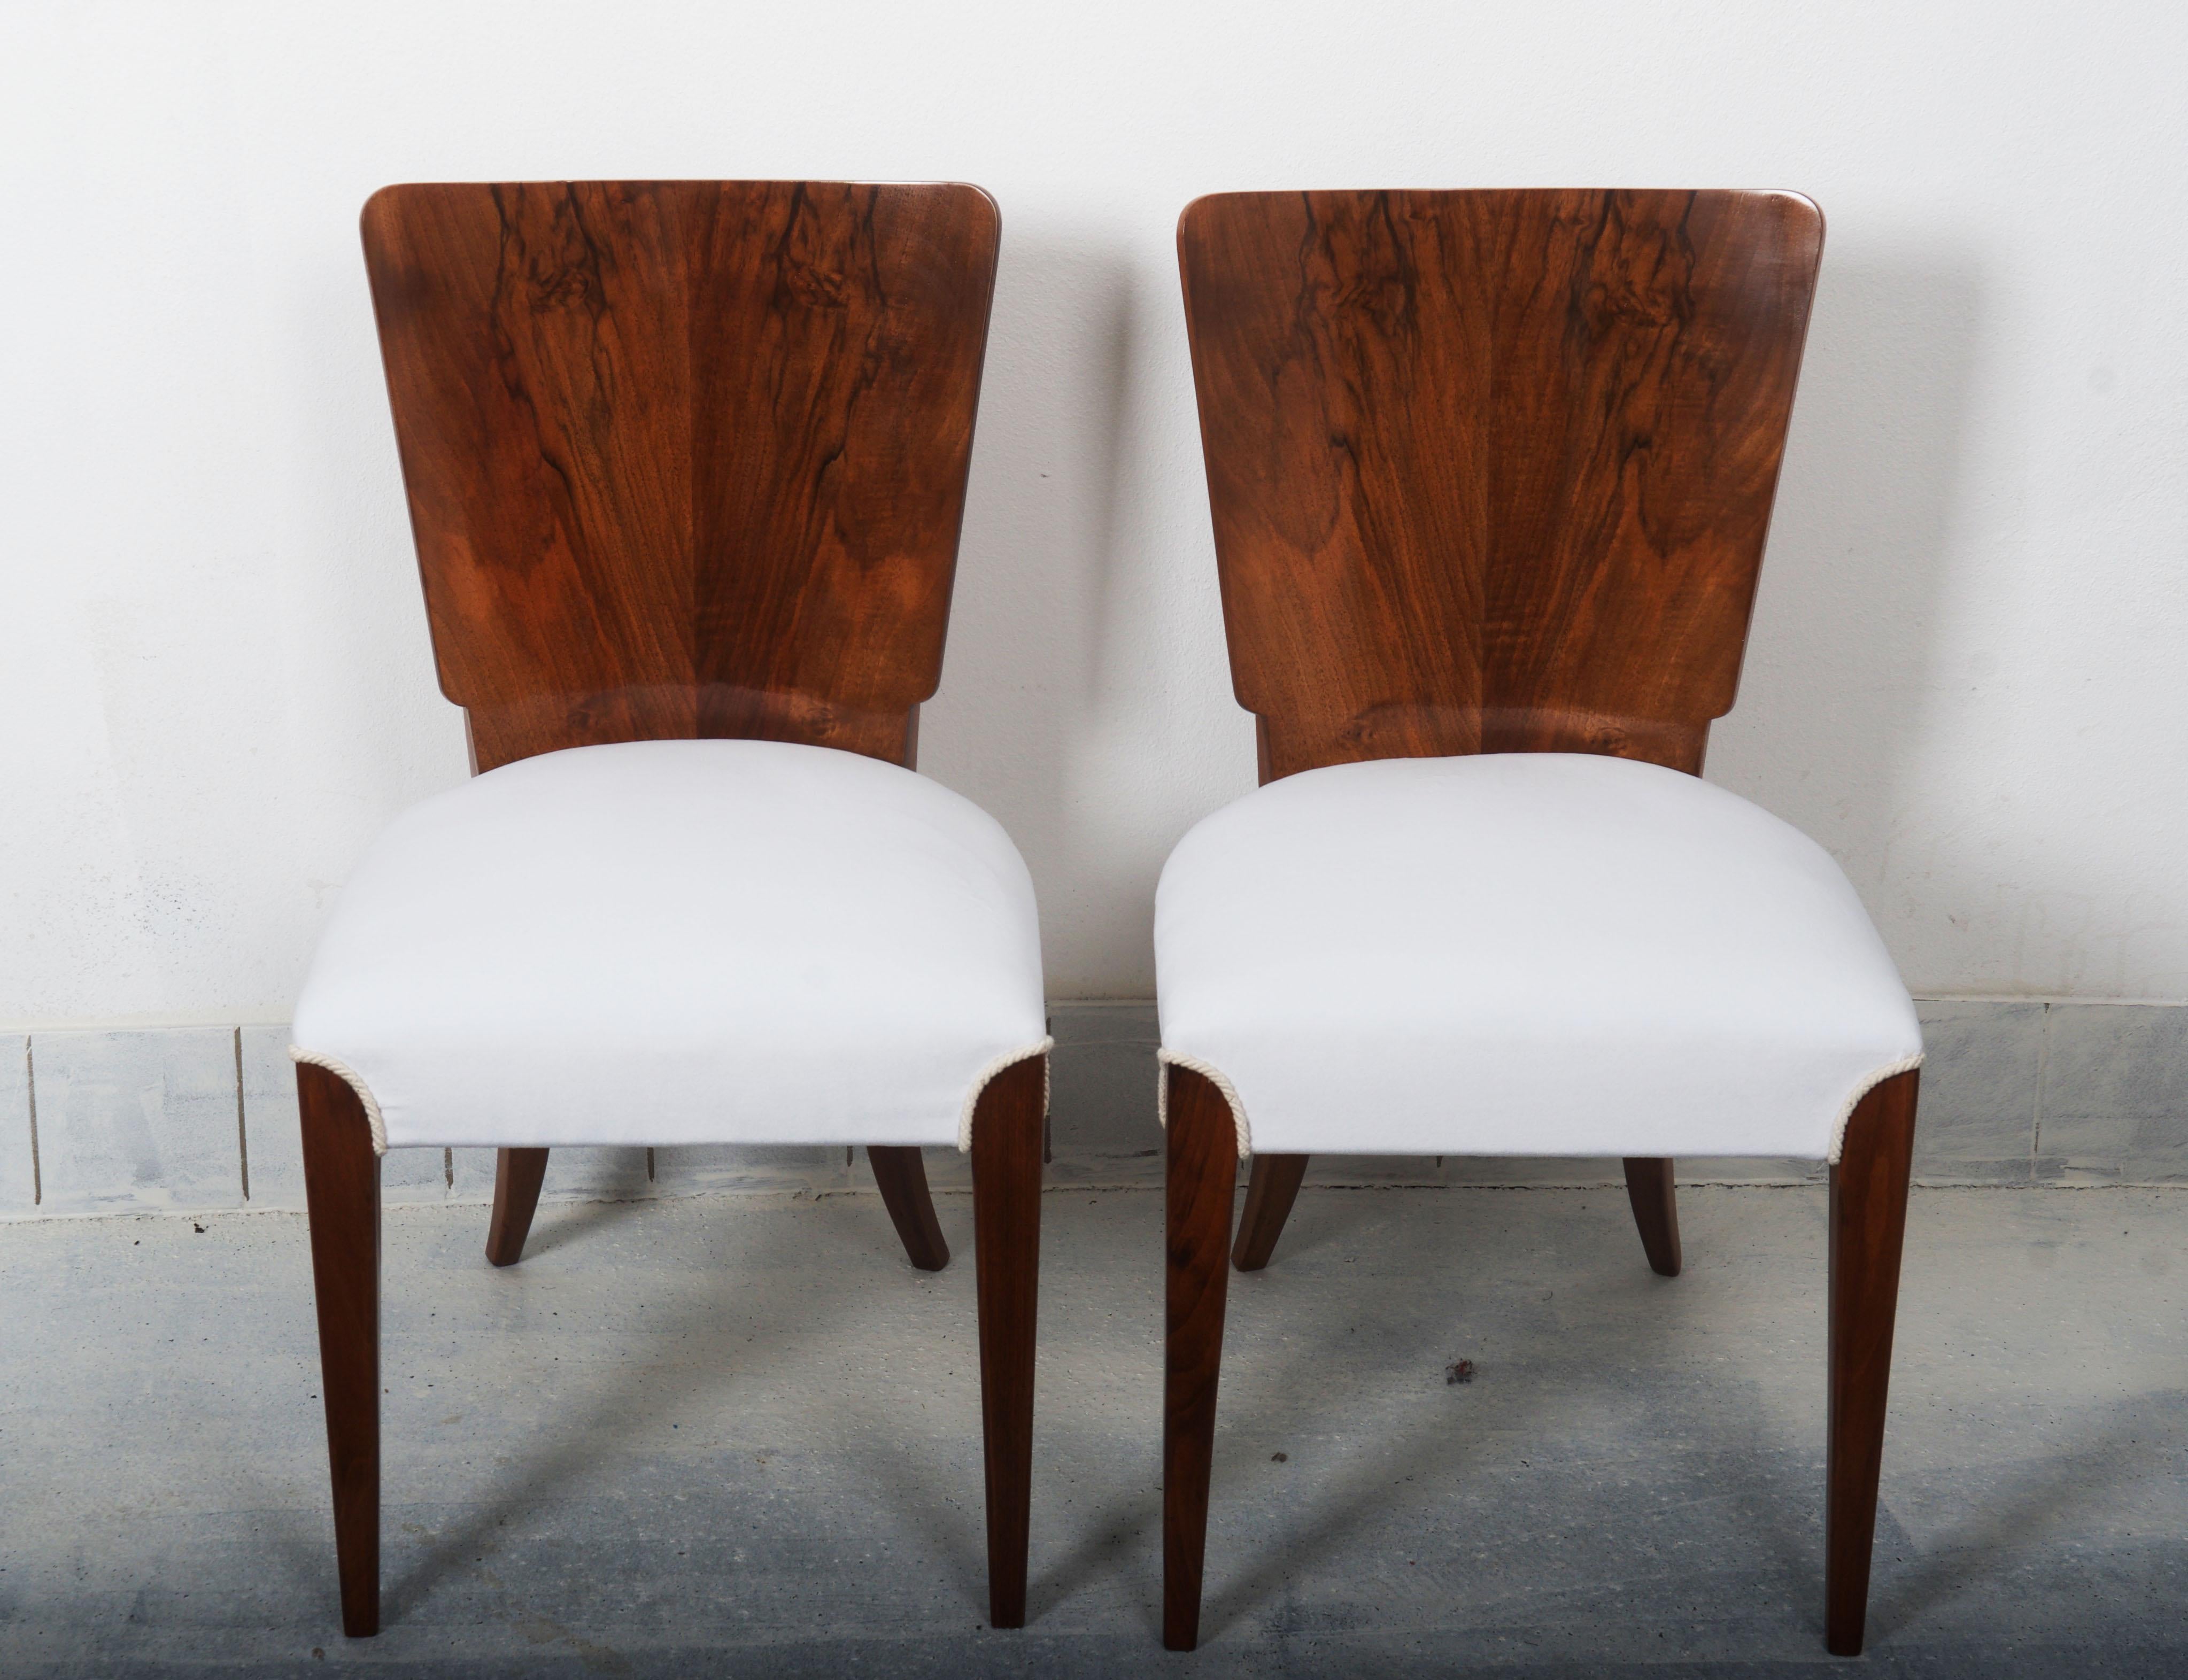 Art Deco chairs designed in the 1930s by Jindrich Halabala with the catalog no. H214.
There are 14-20 pcs. Available but not restored.
The Pictures Shows the last ones which were already sold.
The delivery time for the new ones, covered with